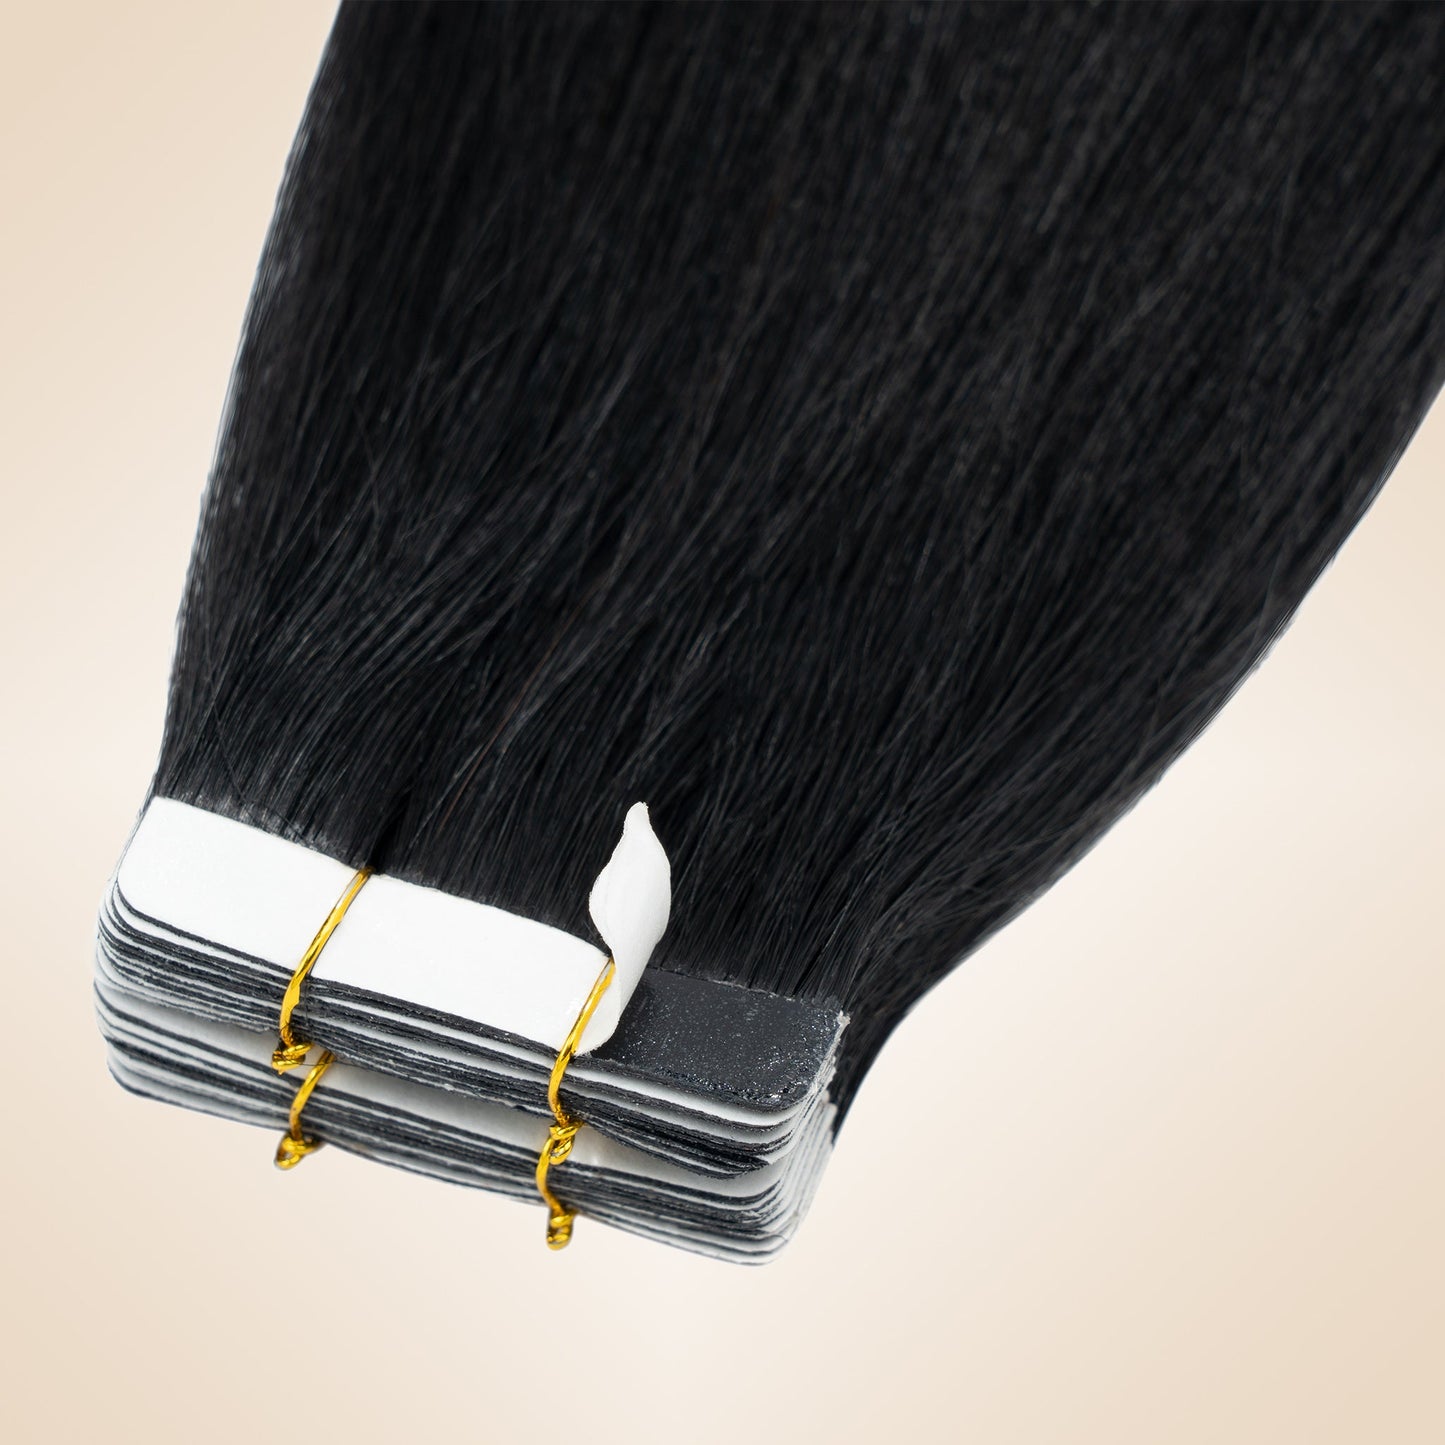 Lightweight Jet Black Tape In Hair Extensions Invisible Weft 20 PCS segohair.com